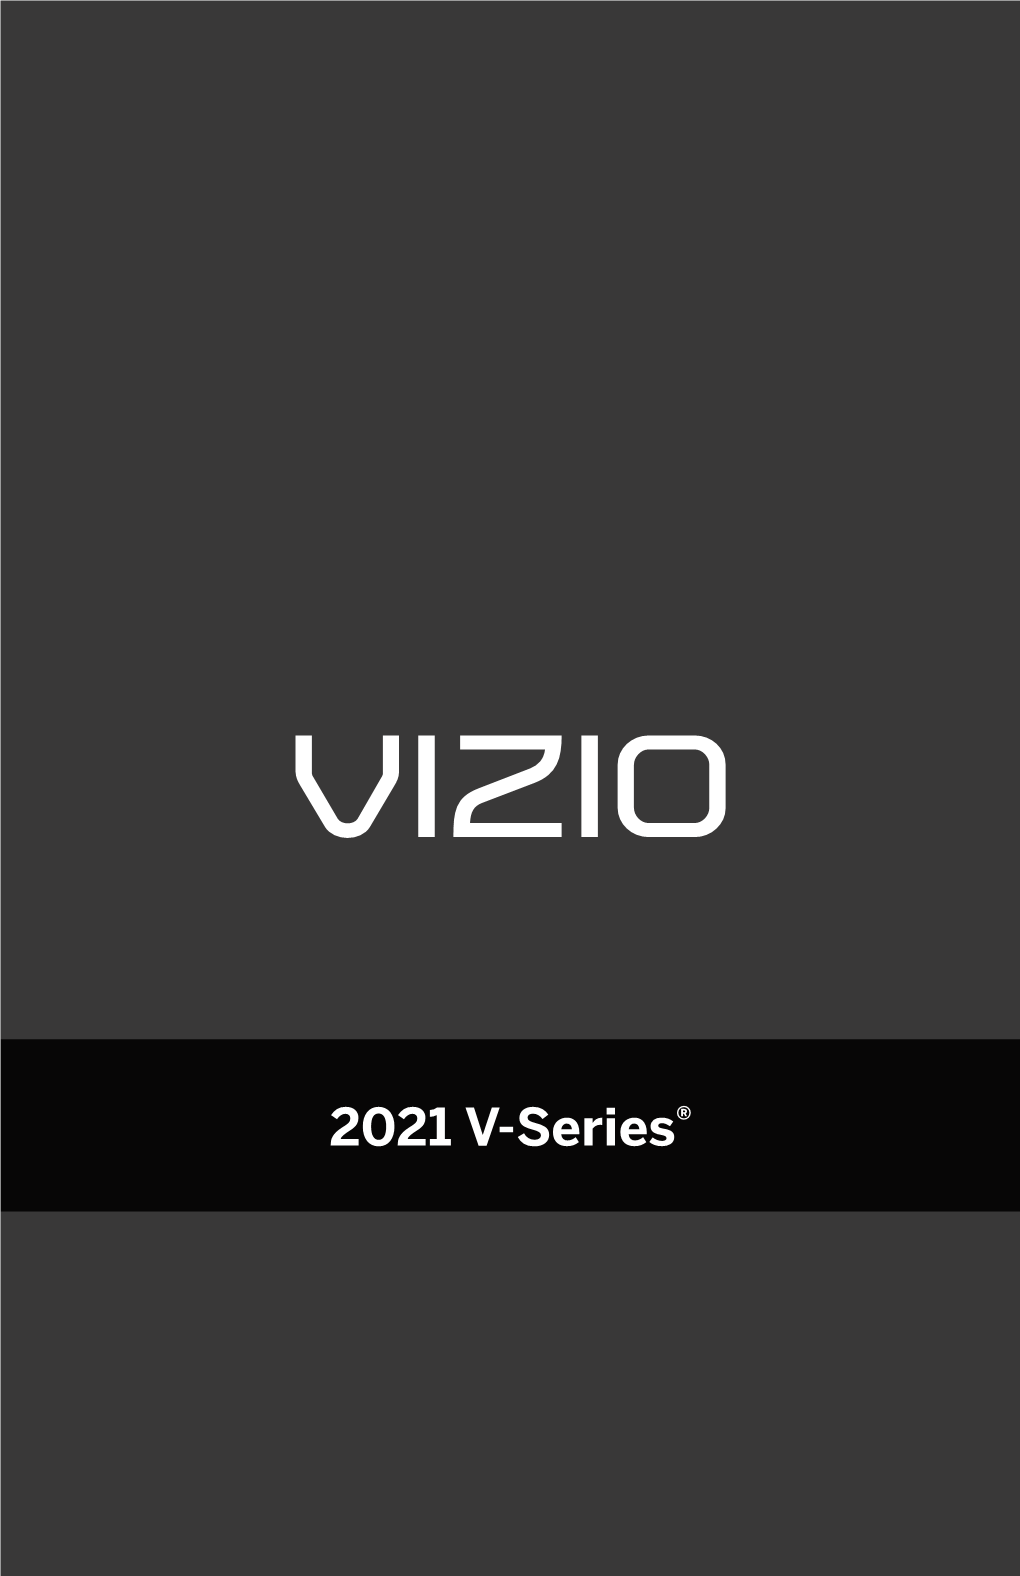 2021 V-Series® Quite Simply the Best TV at This Price